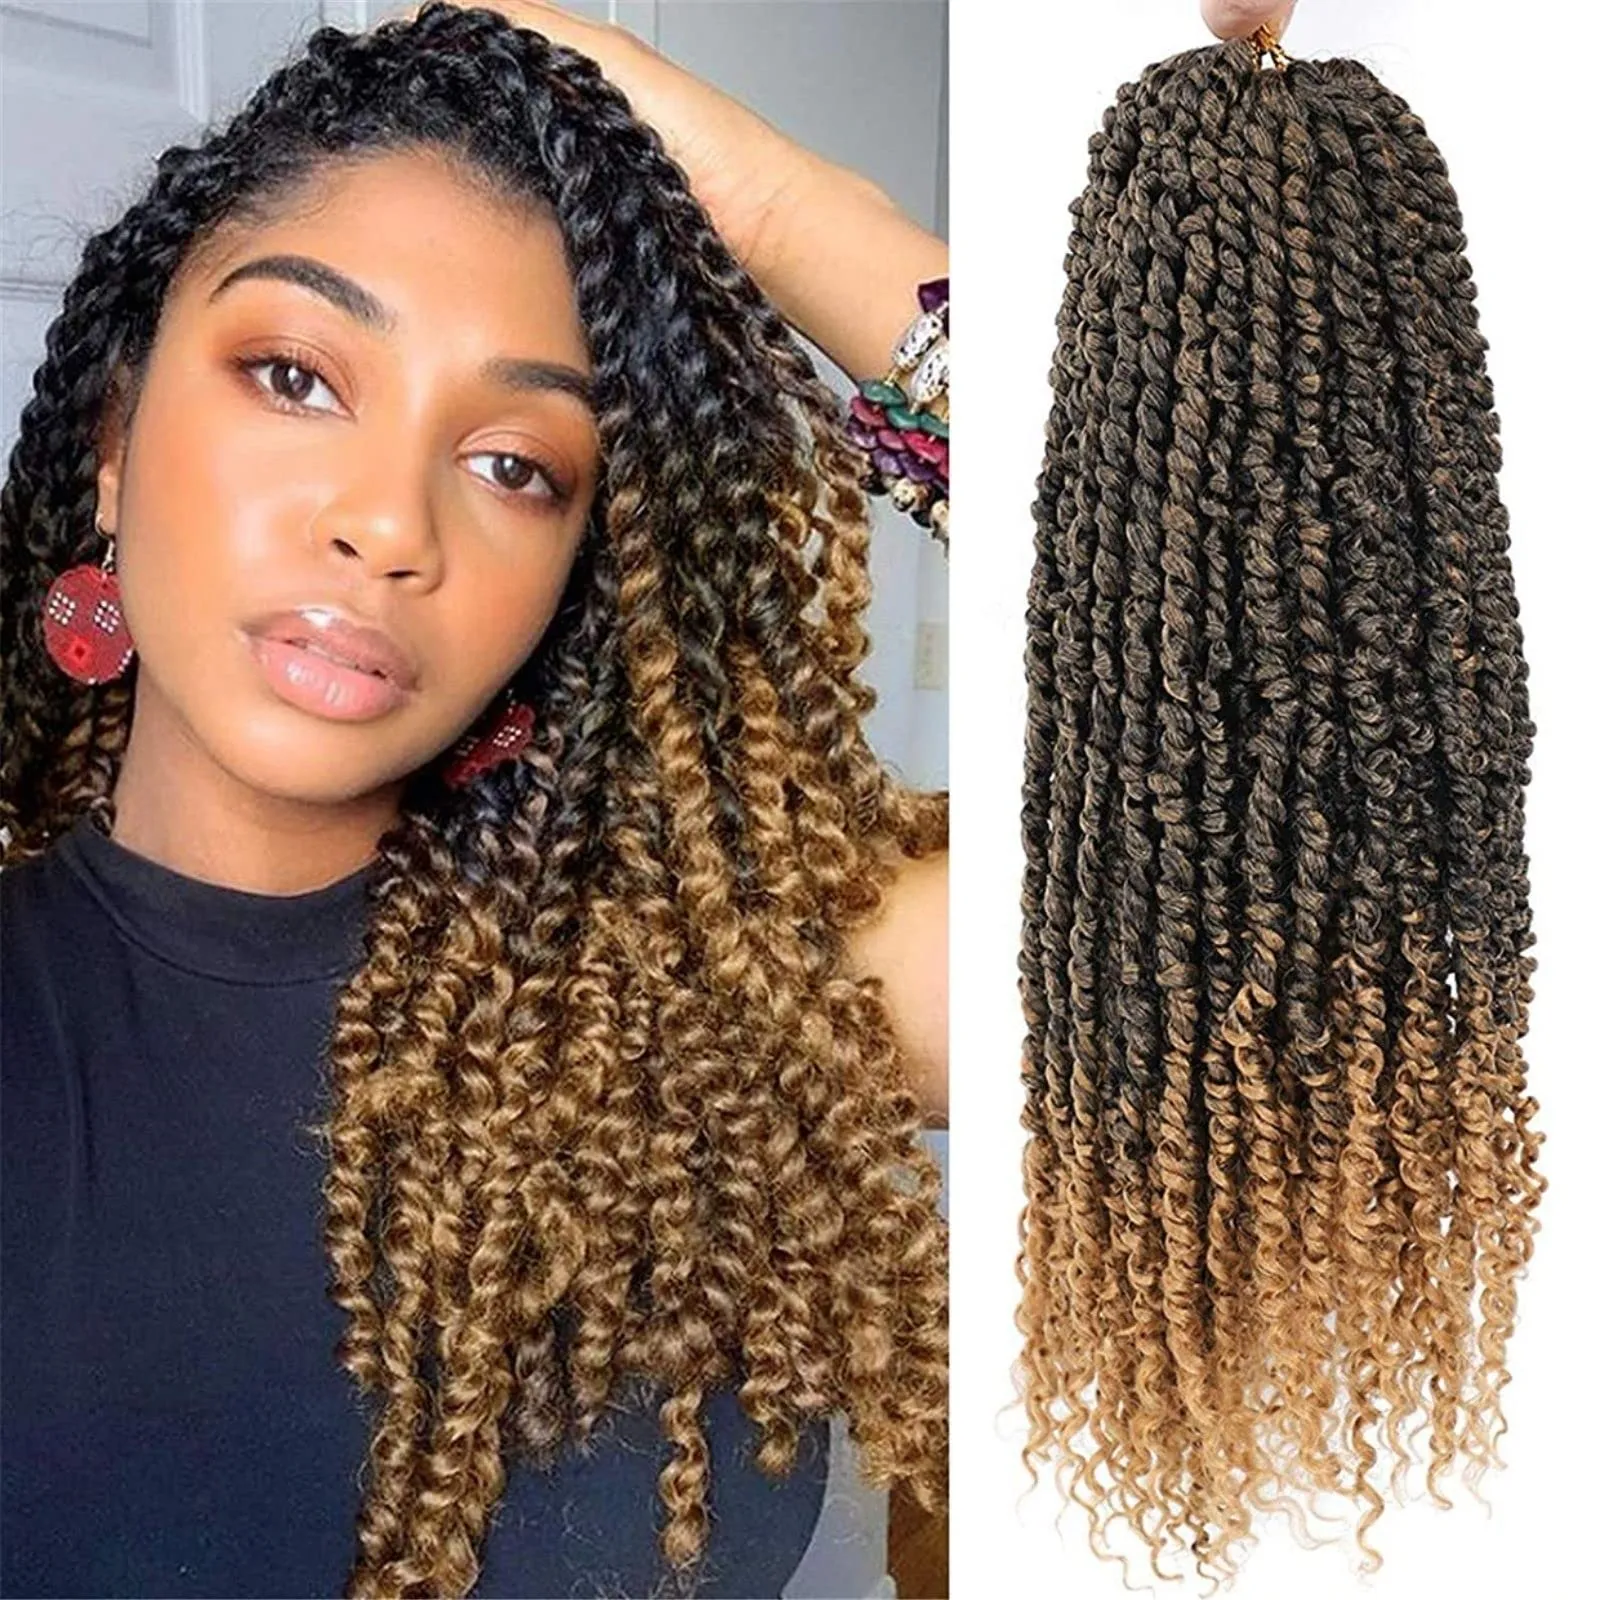 Passion Twist Hair 18 Inch 6 Packs Water Wave Crochet Hair Passion Twists Braiding  Hair Spring Twist Hair Crochet Braids Hair Extension(1B) 